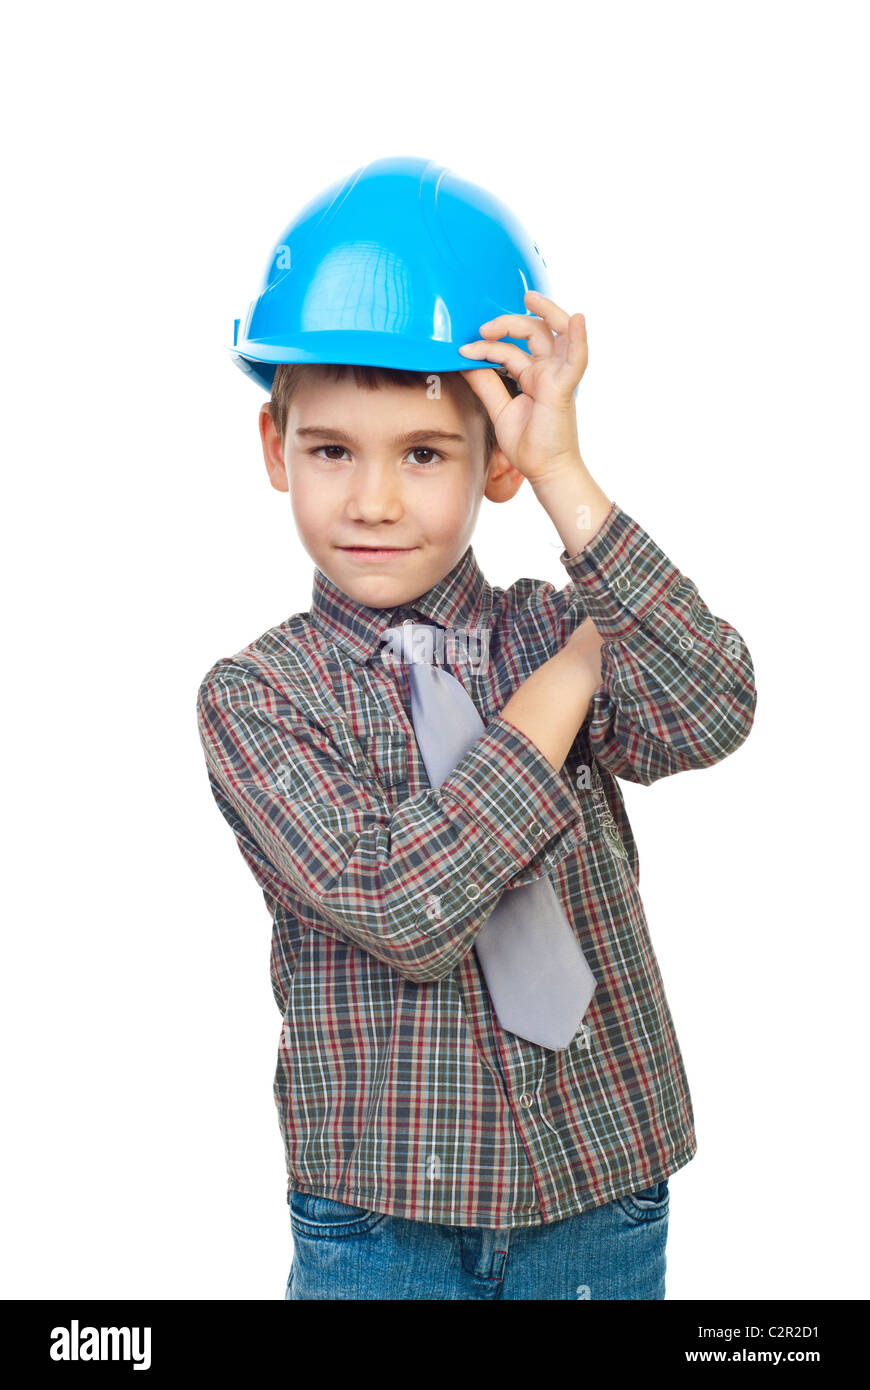 Six years old boy smiling and holding his hard hat isolated on white background Stock Photo